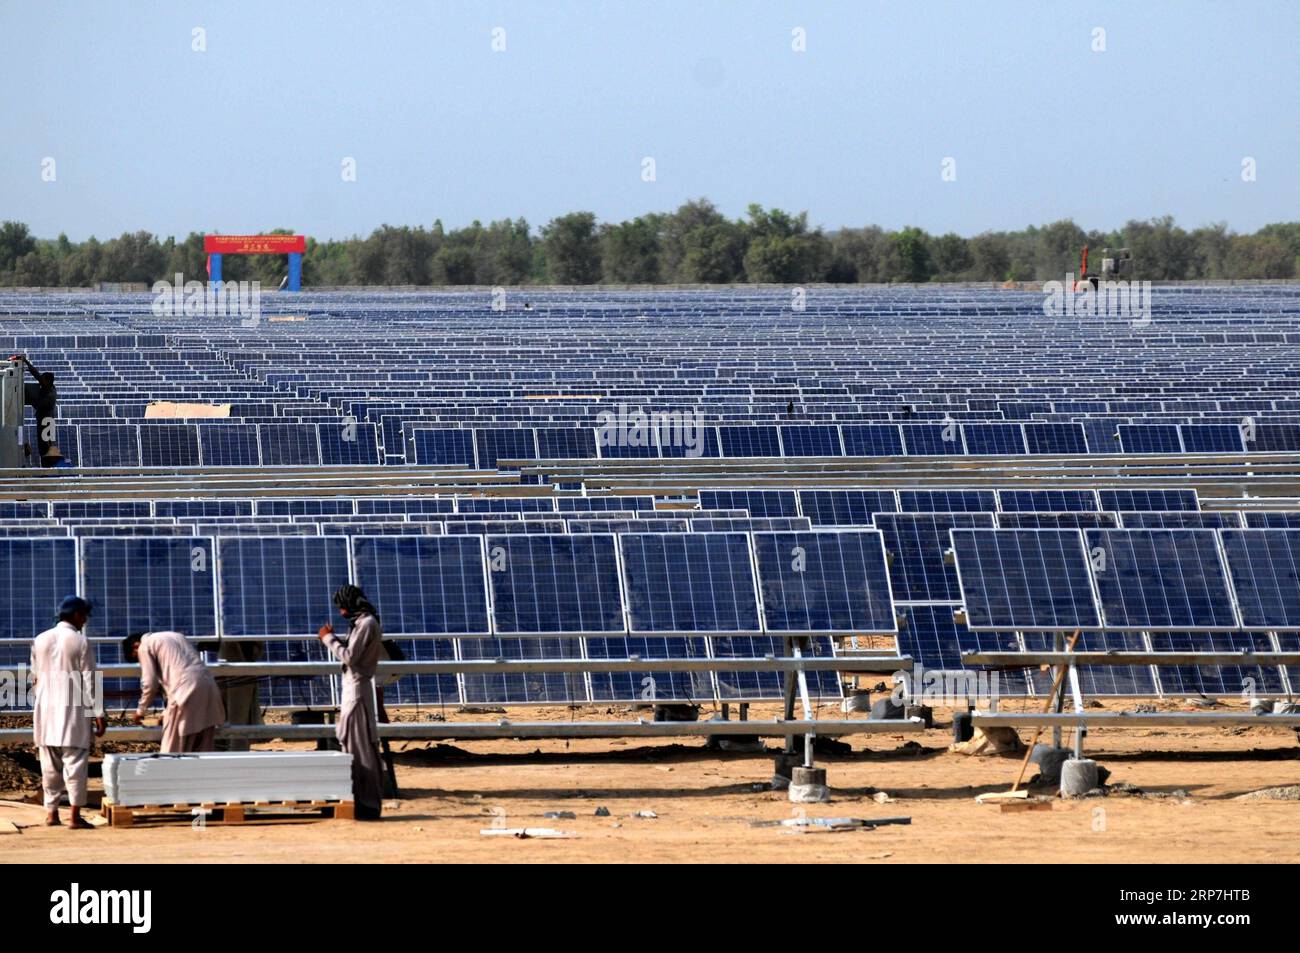 (190207) -- BEIJING, Feb. 7, 2019 -- Workers install solar photovoltaic panels for the Zonergy 900 MW Solar Project in Bahawalpur, Pakistan, Aug. 28, 2015. Pakistani Prime Minister Imran Khan said on Wednesday that the China-Pakistan Economic Corridor (CPEC) will bring a host of economic opportunities for the country s southwest Balochistan province, local reports said. During his conversation with political representatives of the Balochistan Awami Party, the prime minister said that development of Gwadar port will open a new era of prosperity in Balochistan by creating vast opportunities for Stock Photo